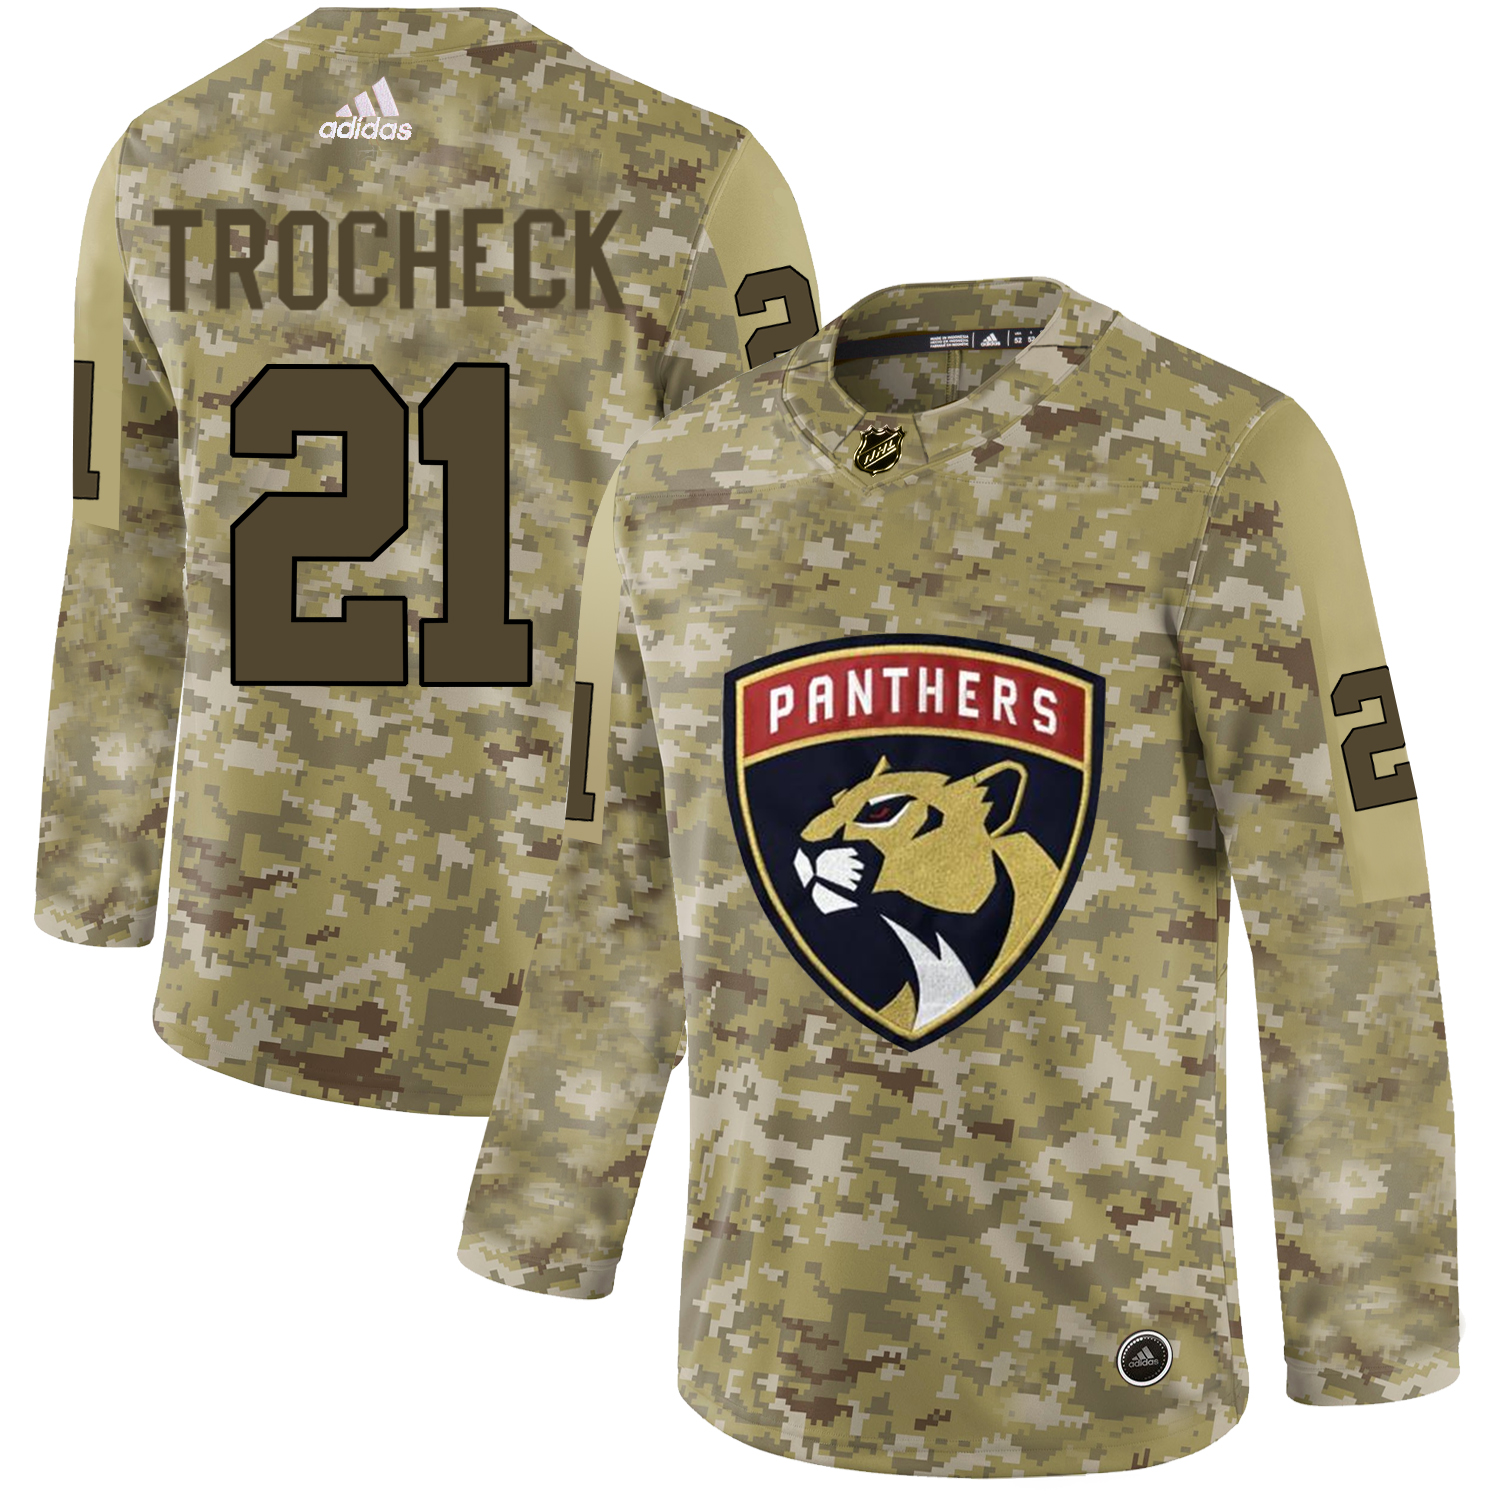 Adidas Panthers #21 Vincent Trocheck Camo Authentic Stitched NHL Jersey